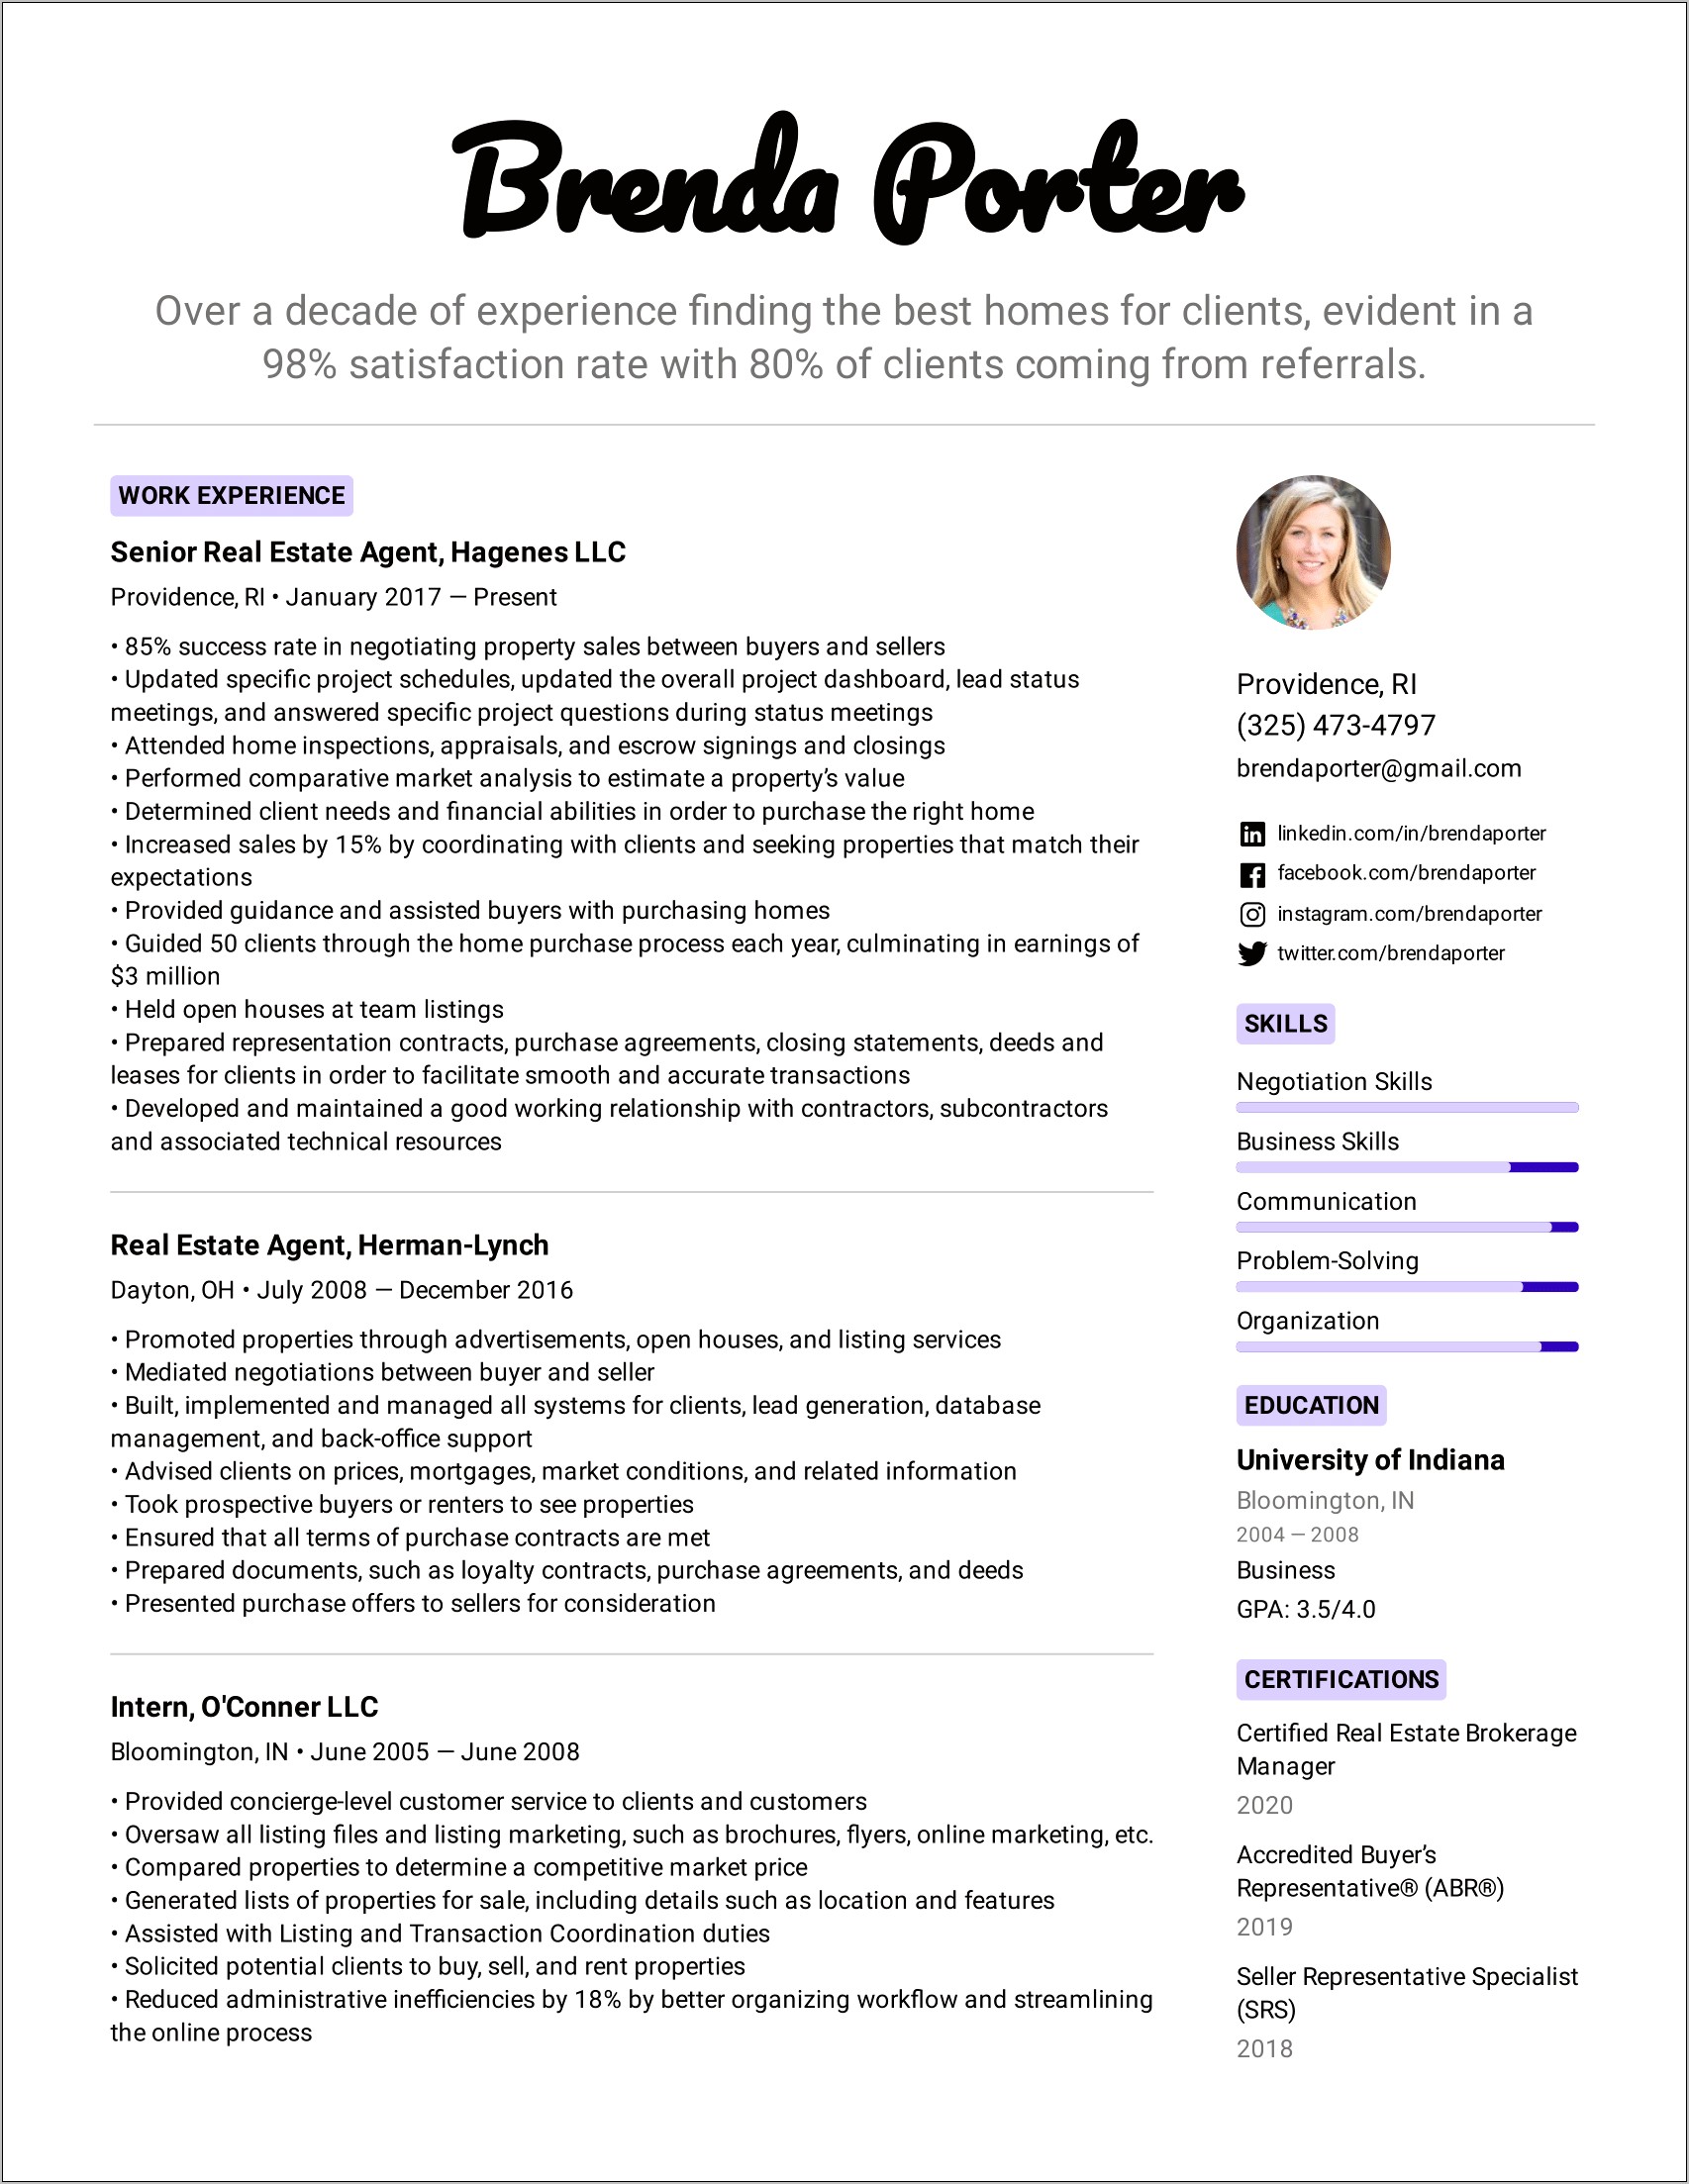 Resume Examples For Real Estate Assistant